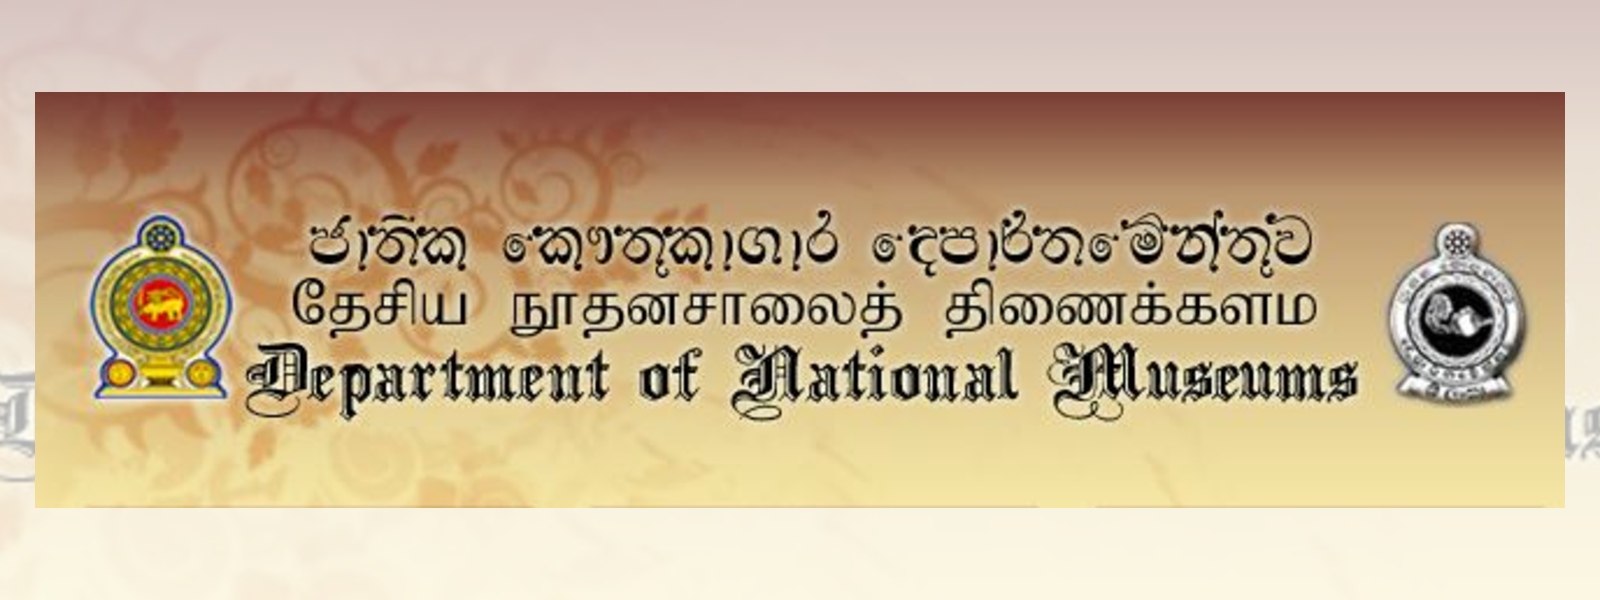 All museums to reopen from 1st July: Department of National Museums Sri Lanka